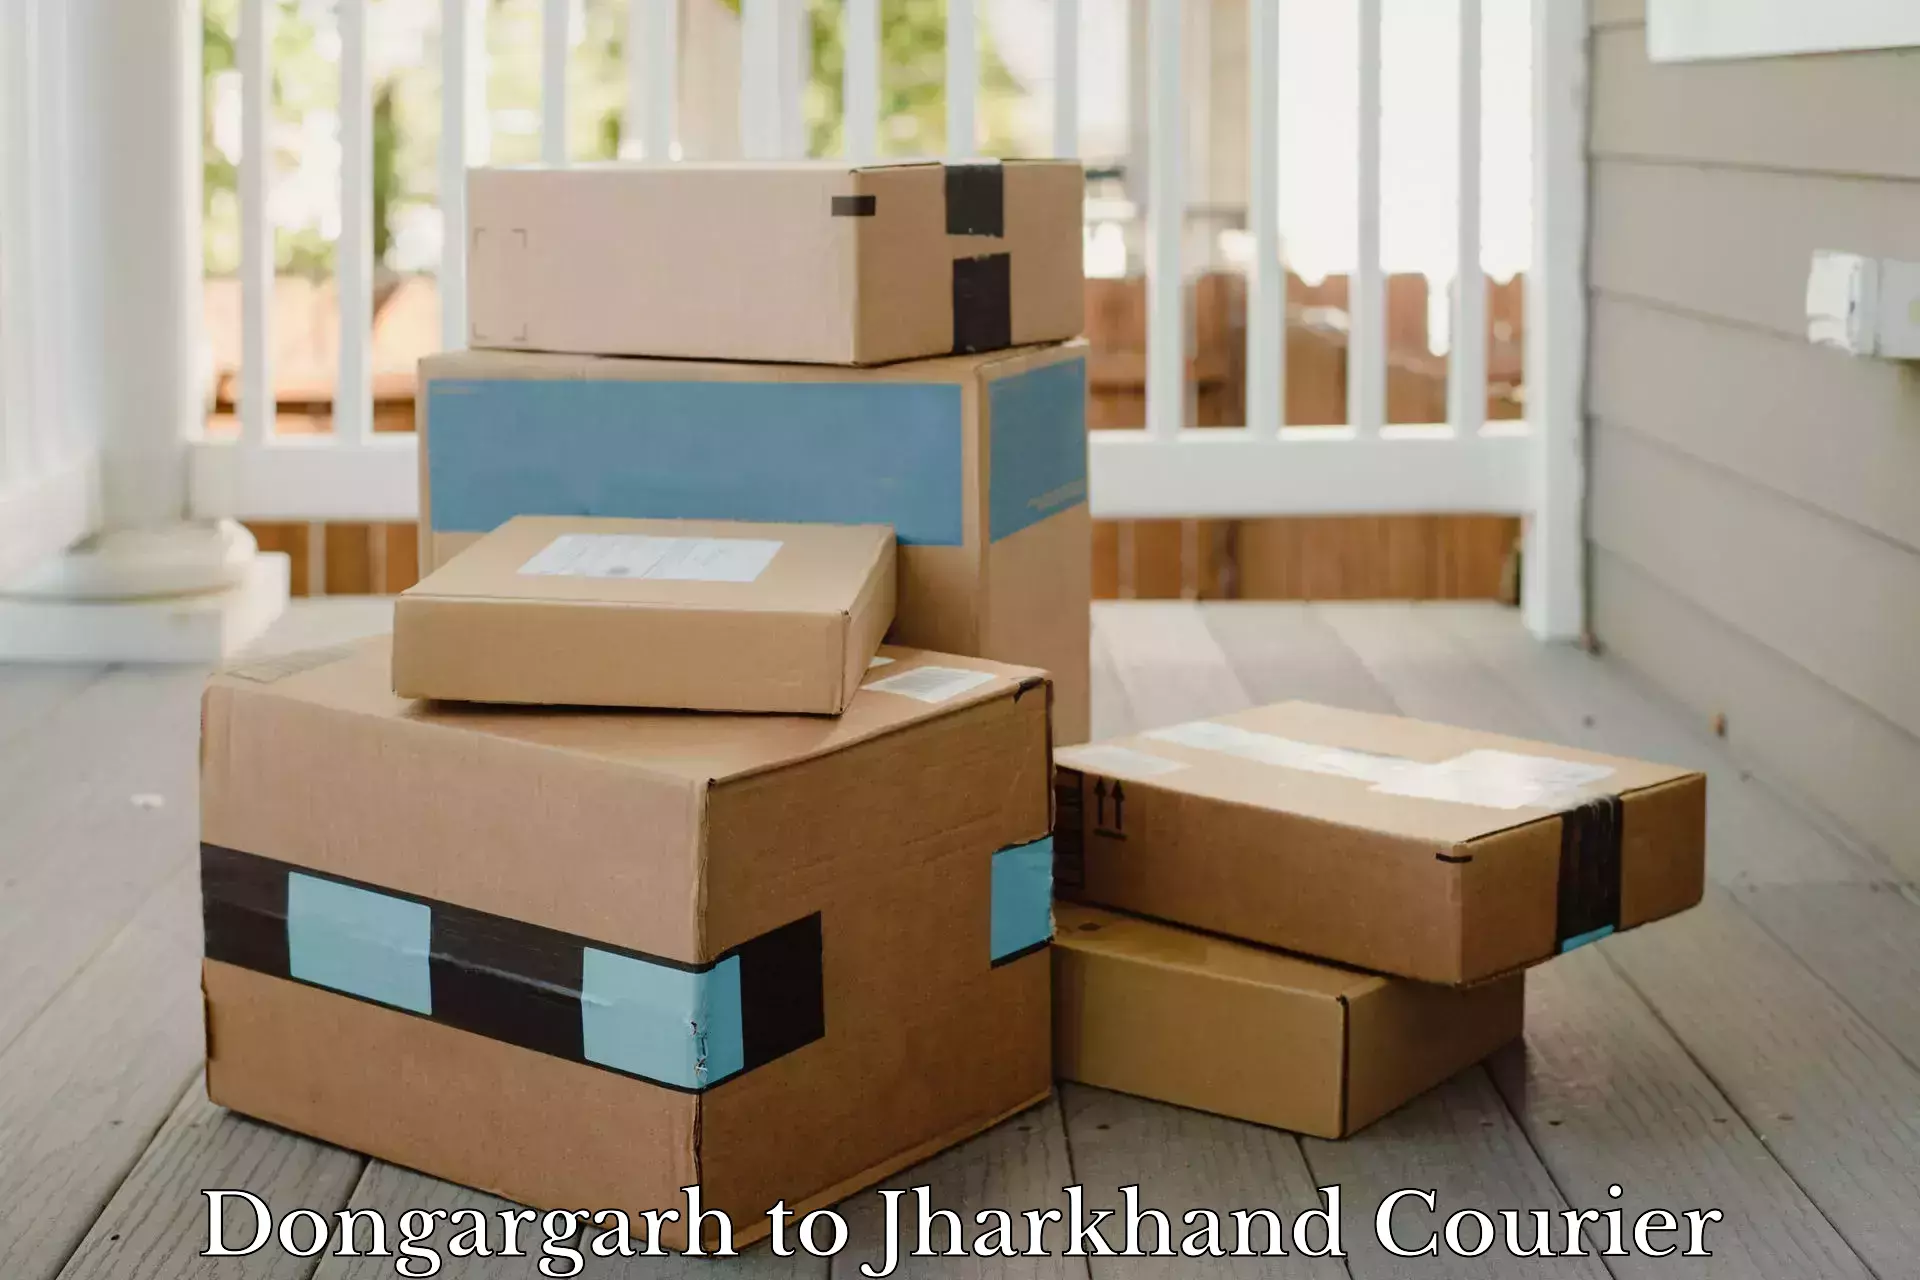 Advanced courier platforms Dongargarh to Ranchi